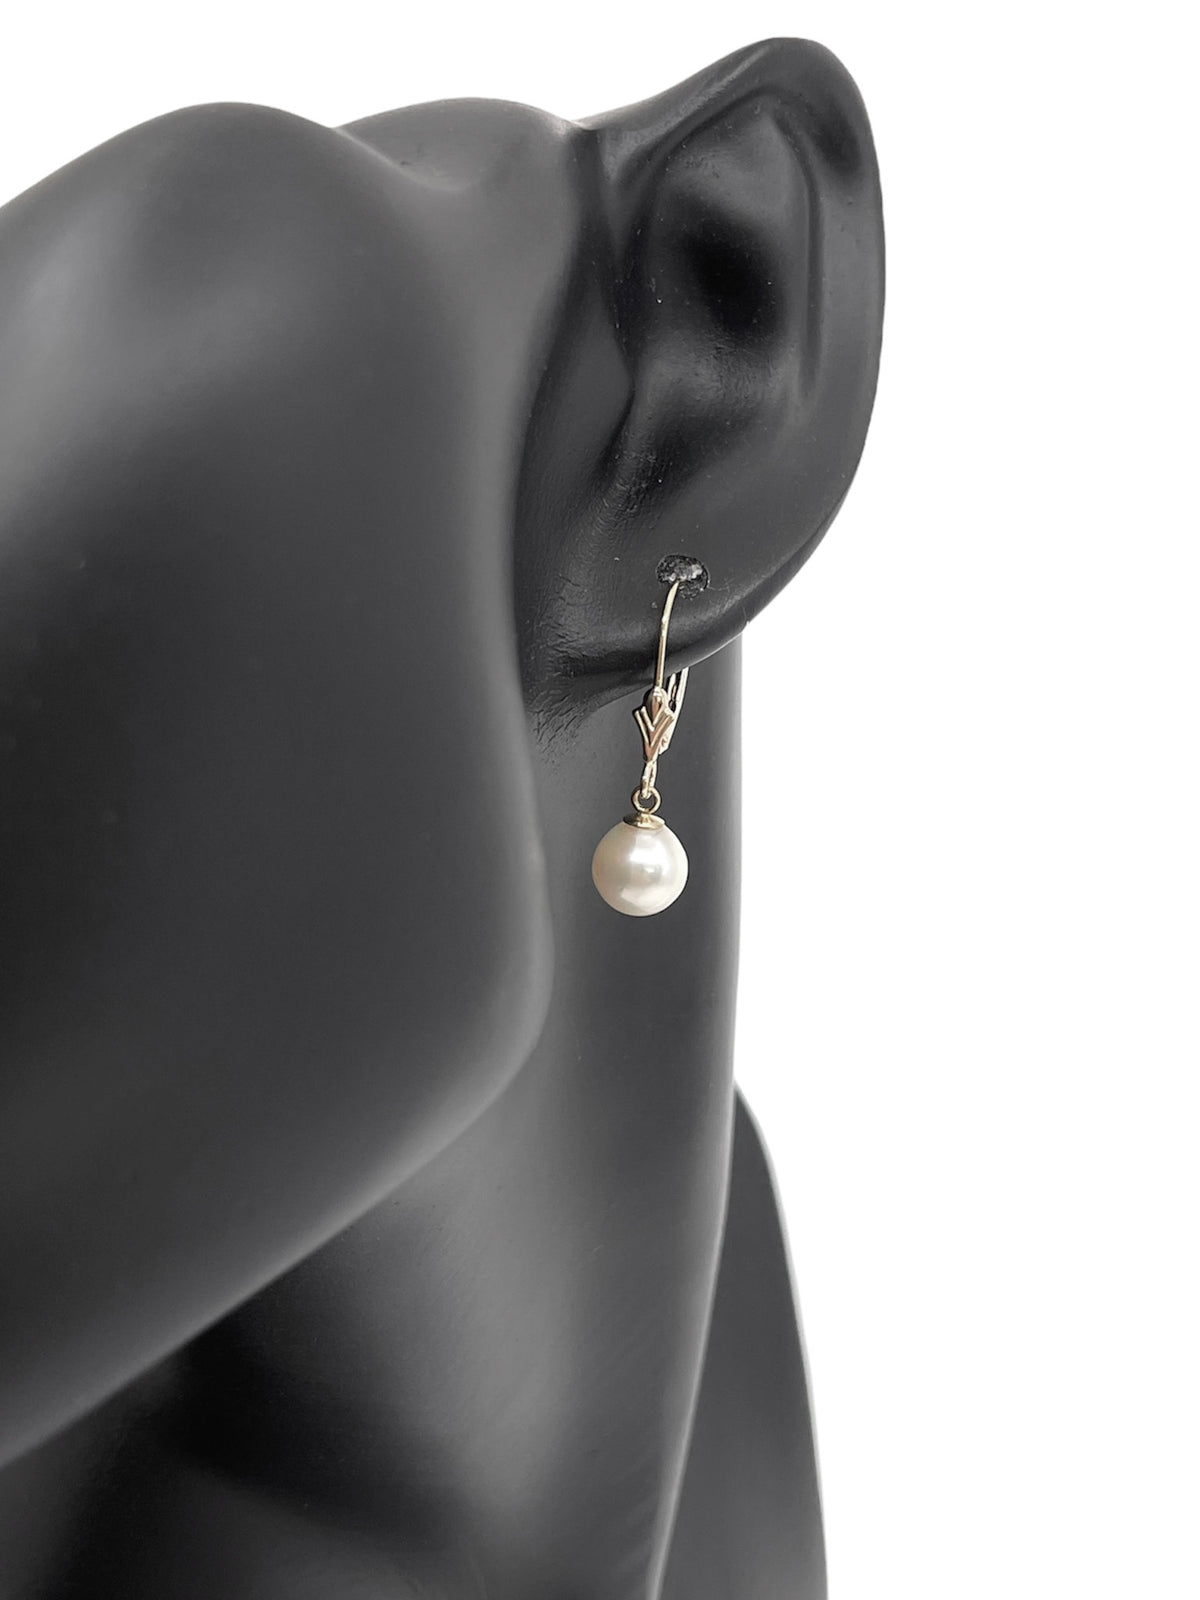 14K White Gold 7-7.5mm Cultured Pearl Earrings with Lever Backs